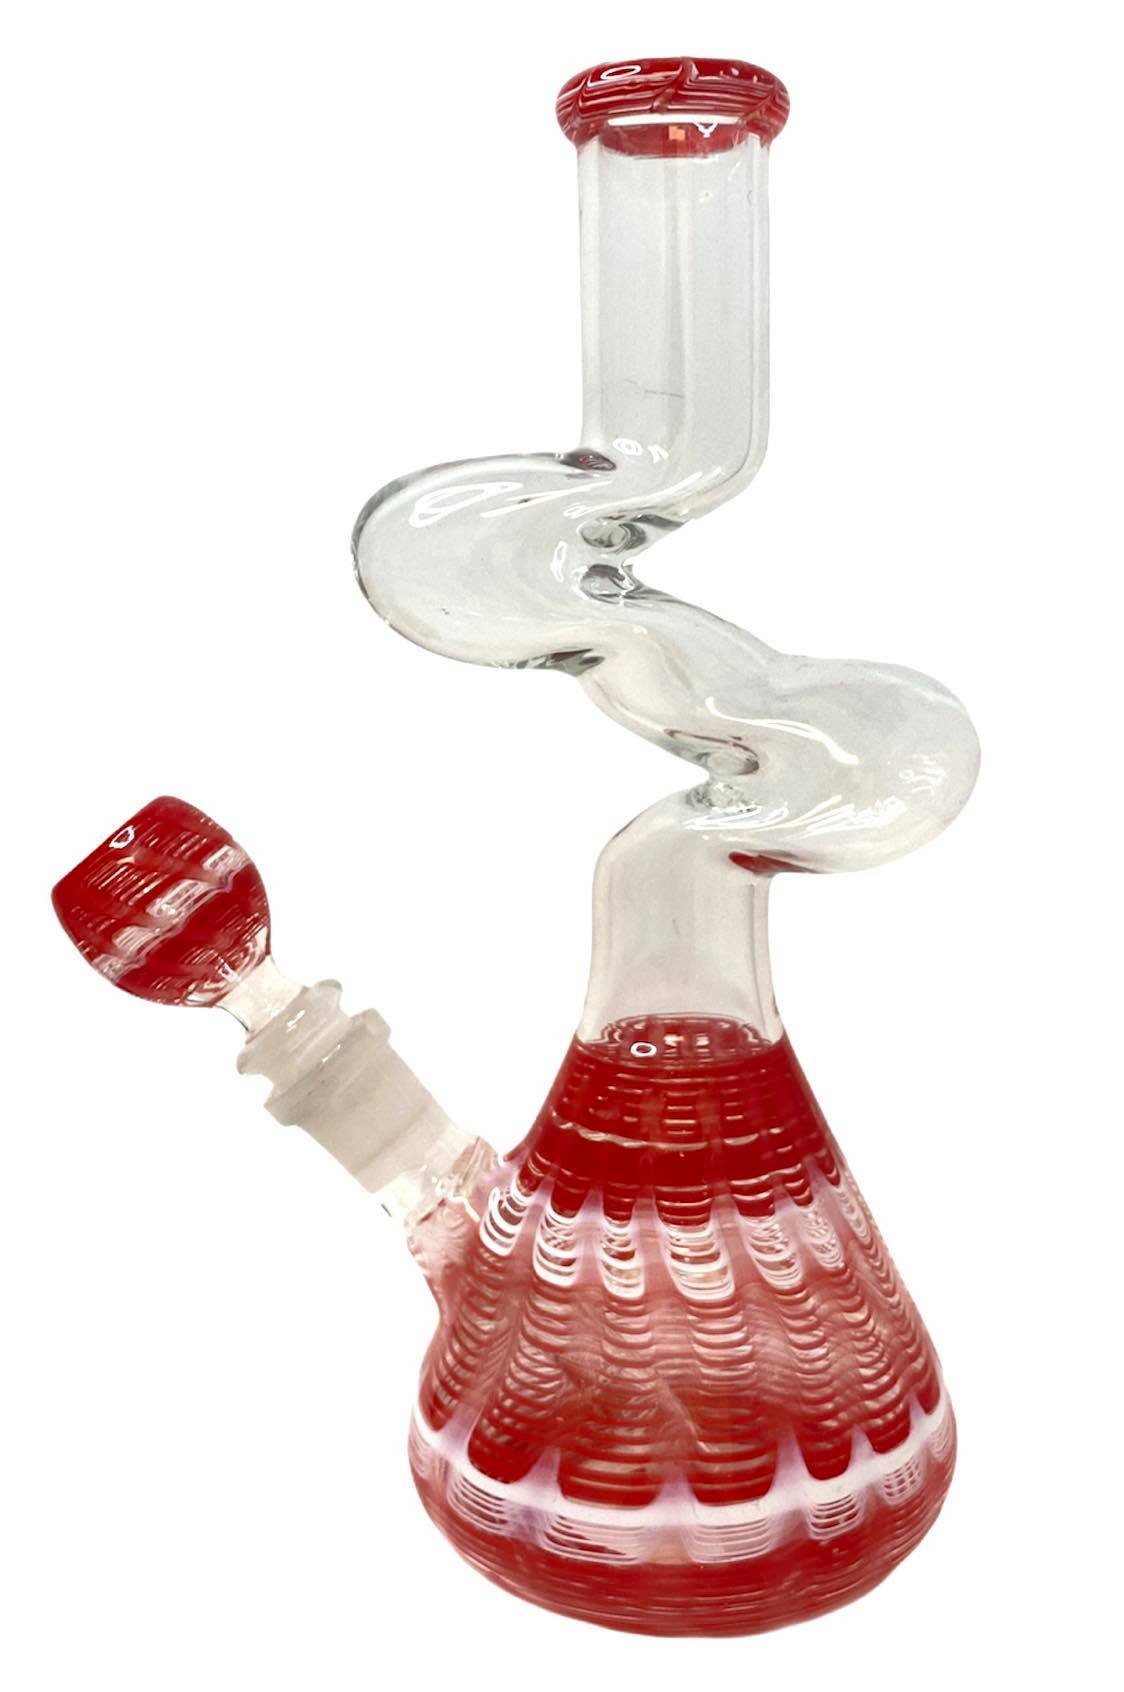 10" DOUBLE ZONG GOG WATER PIPE